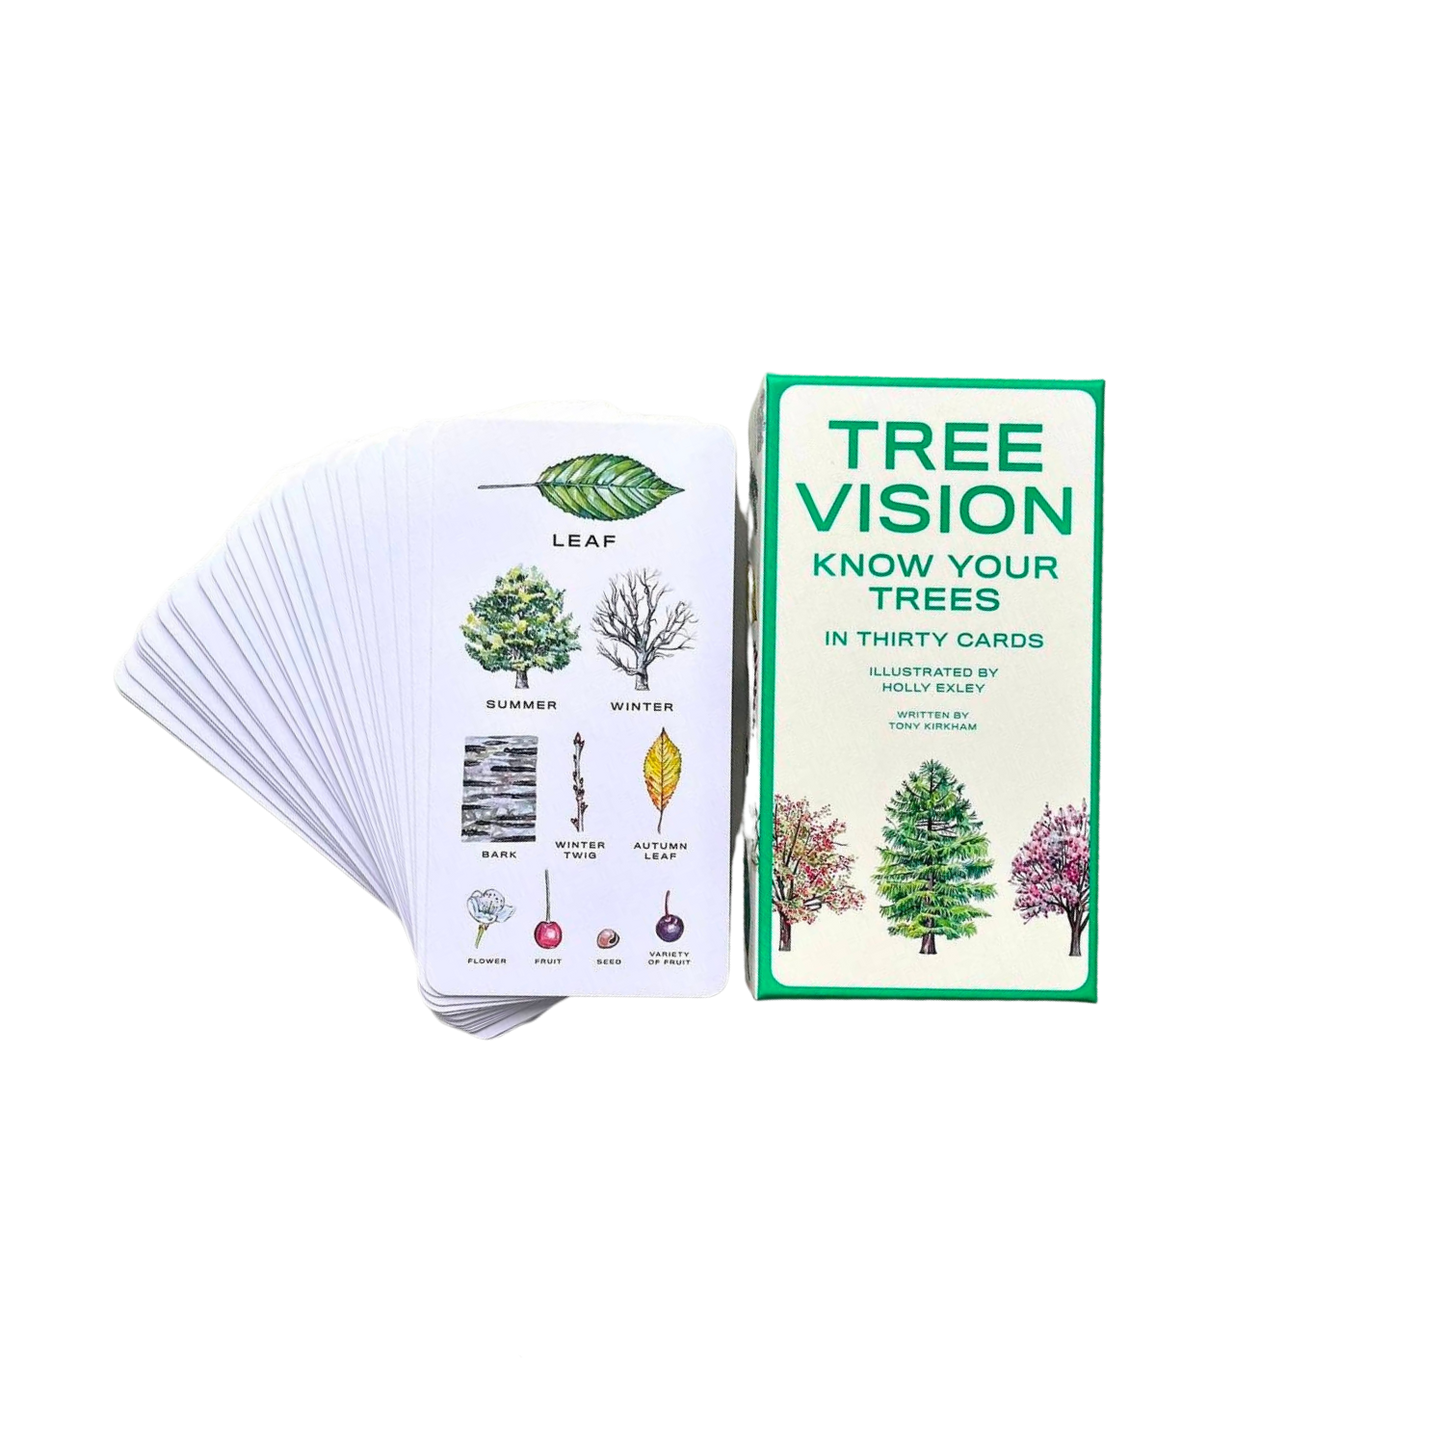 Tree Vision: Know your trees